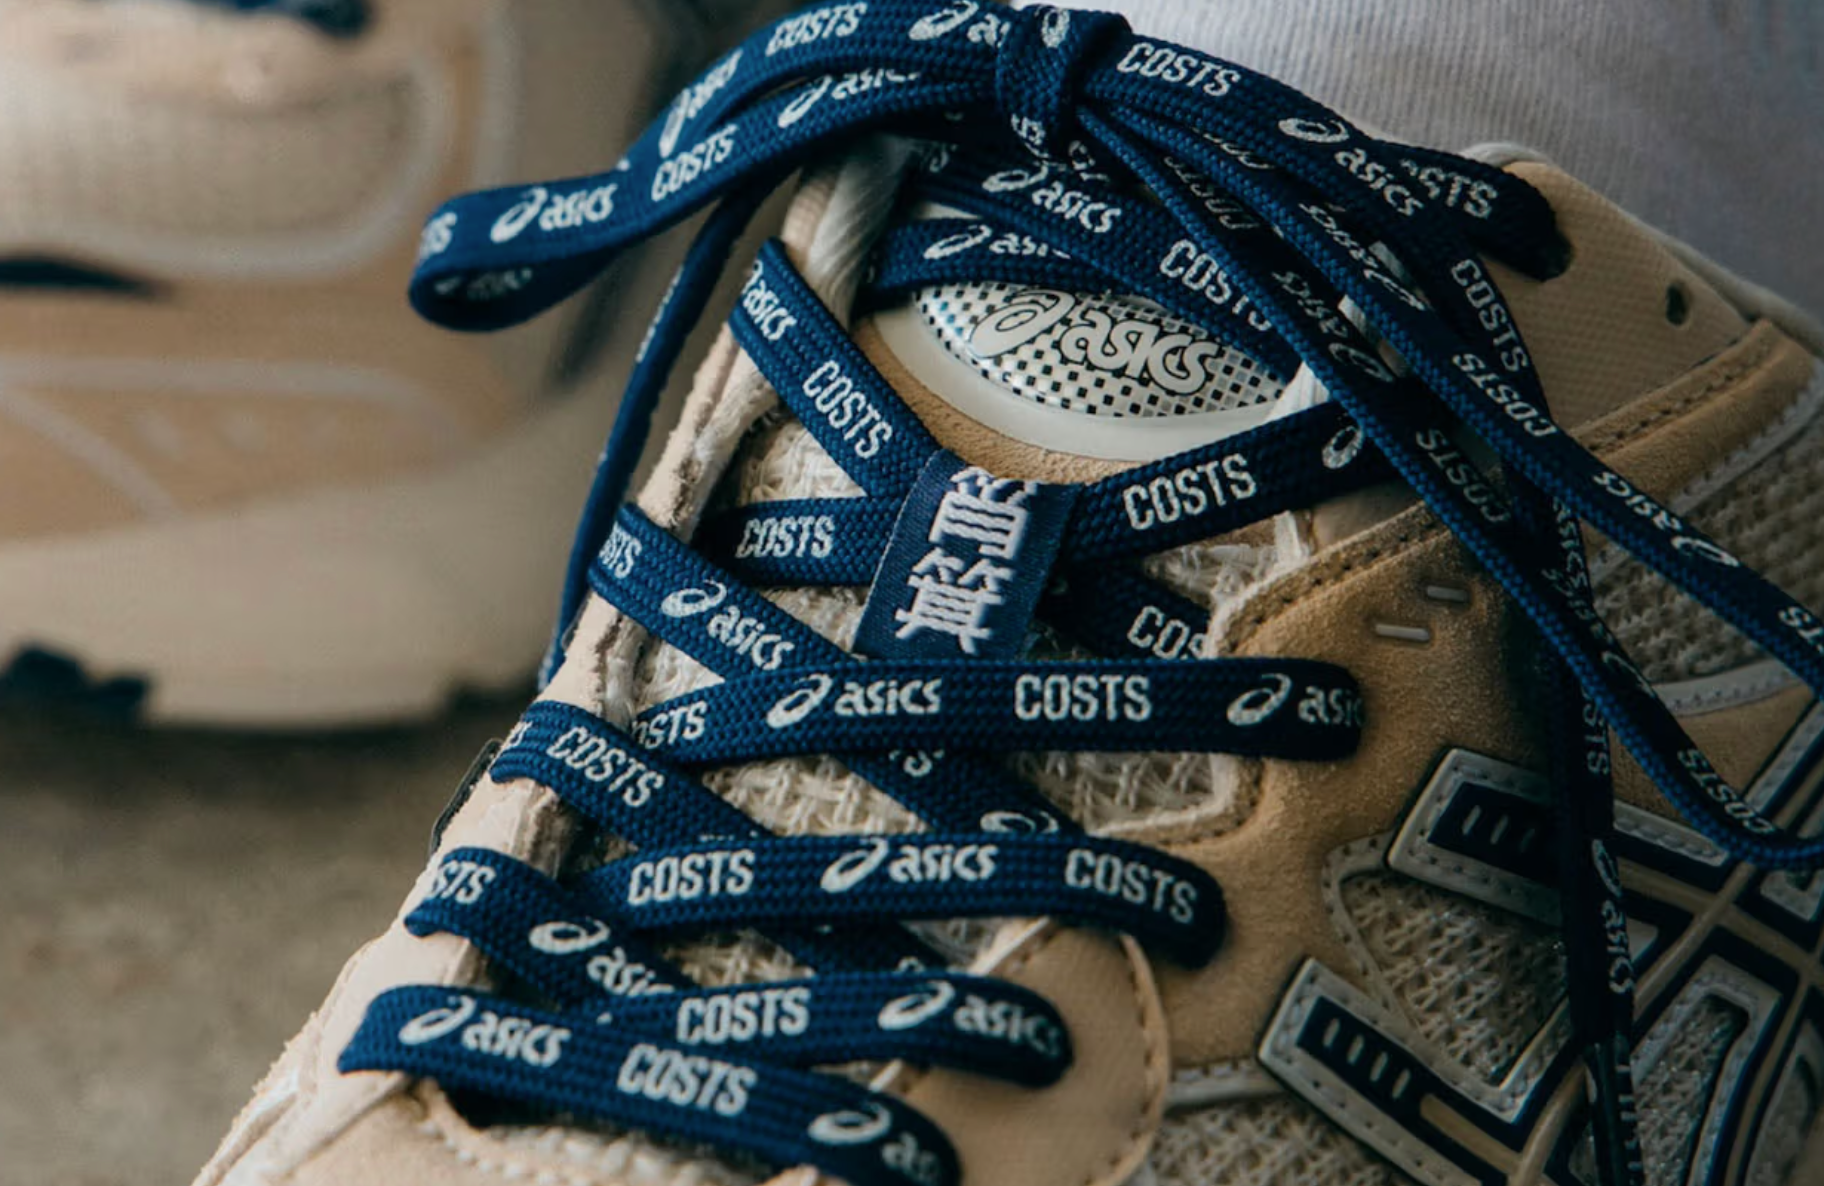 Costs and Asics follow up on their August collaboration with the latest sneaker. Photo: Costs x Asics